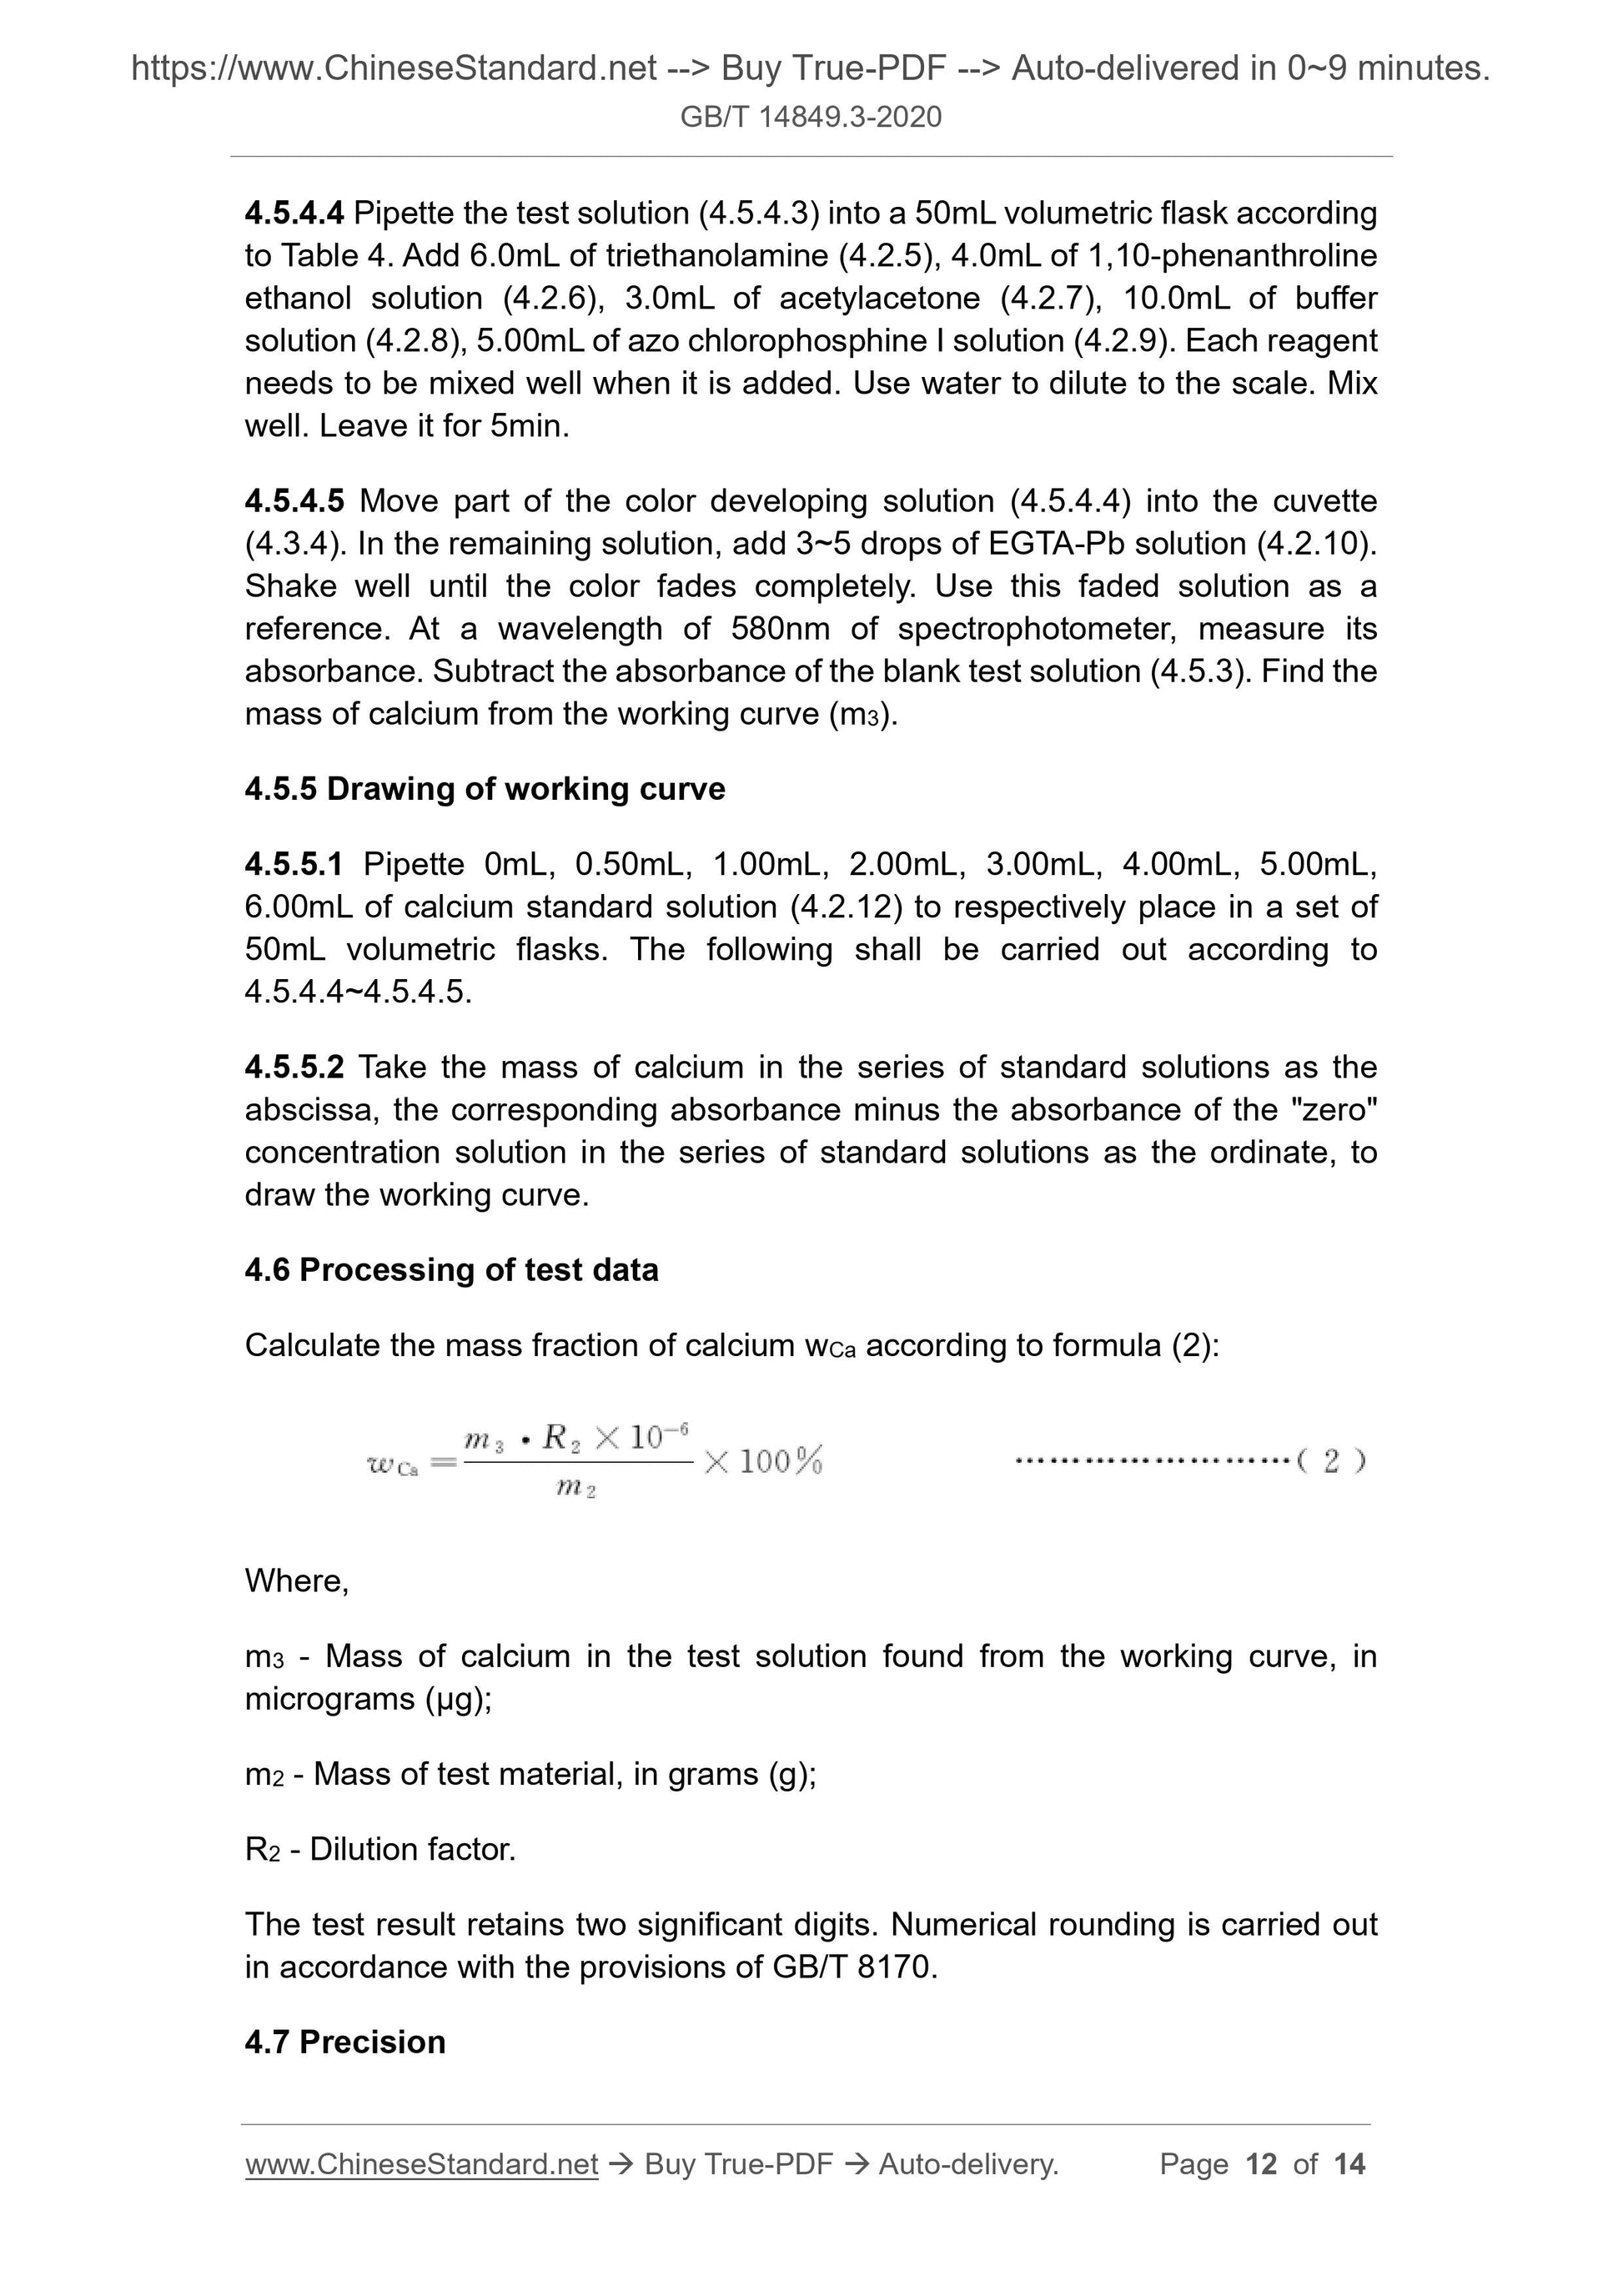 GB/T 14849.3-2020 Page 7